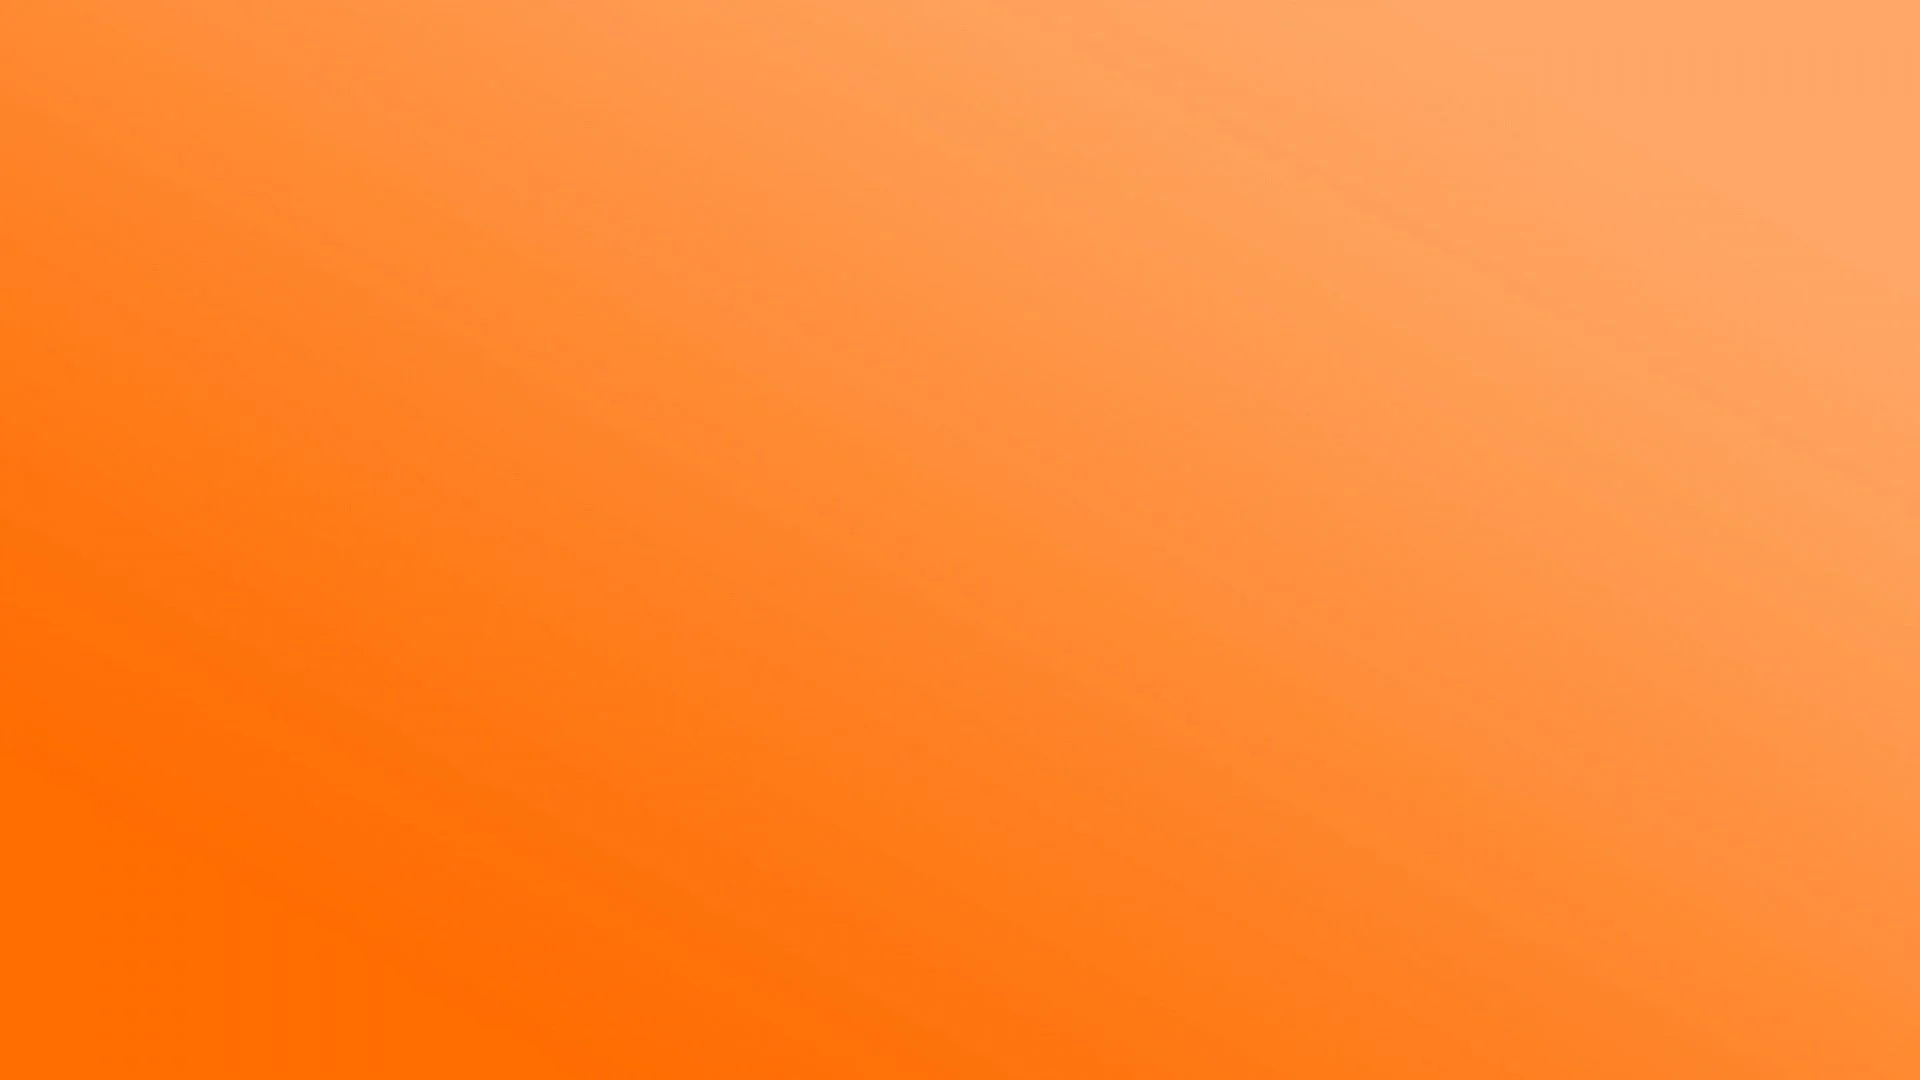 1920x1080 Orange and White Wallpapers Top Free Orange and White Backgrounds